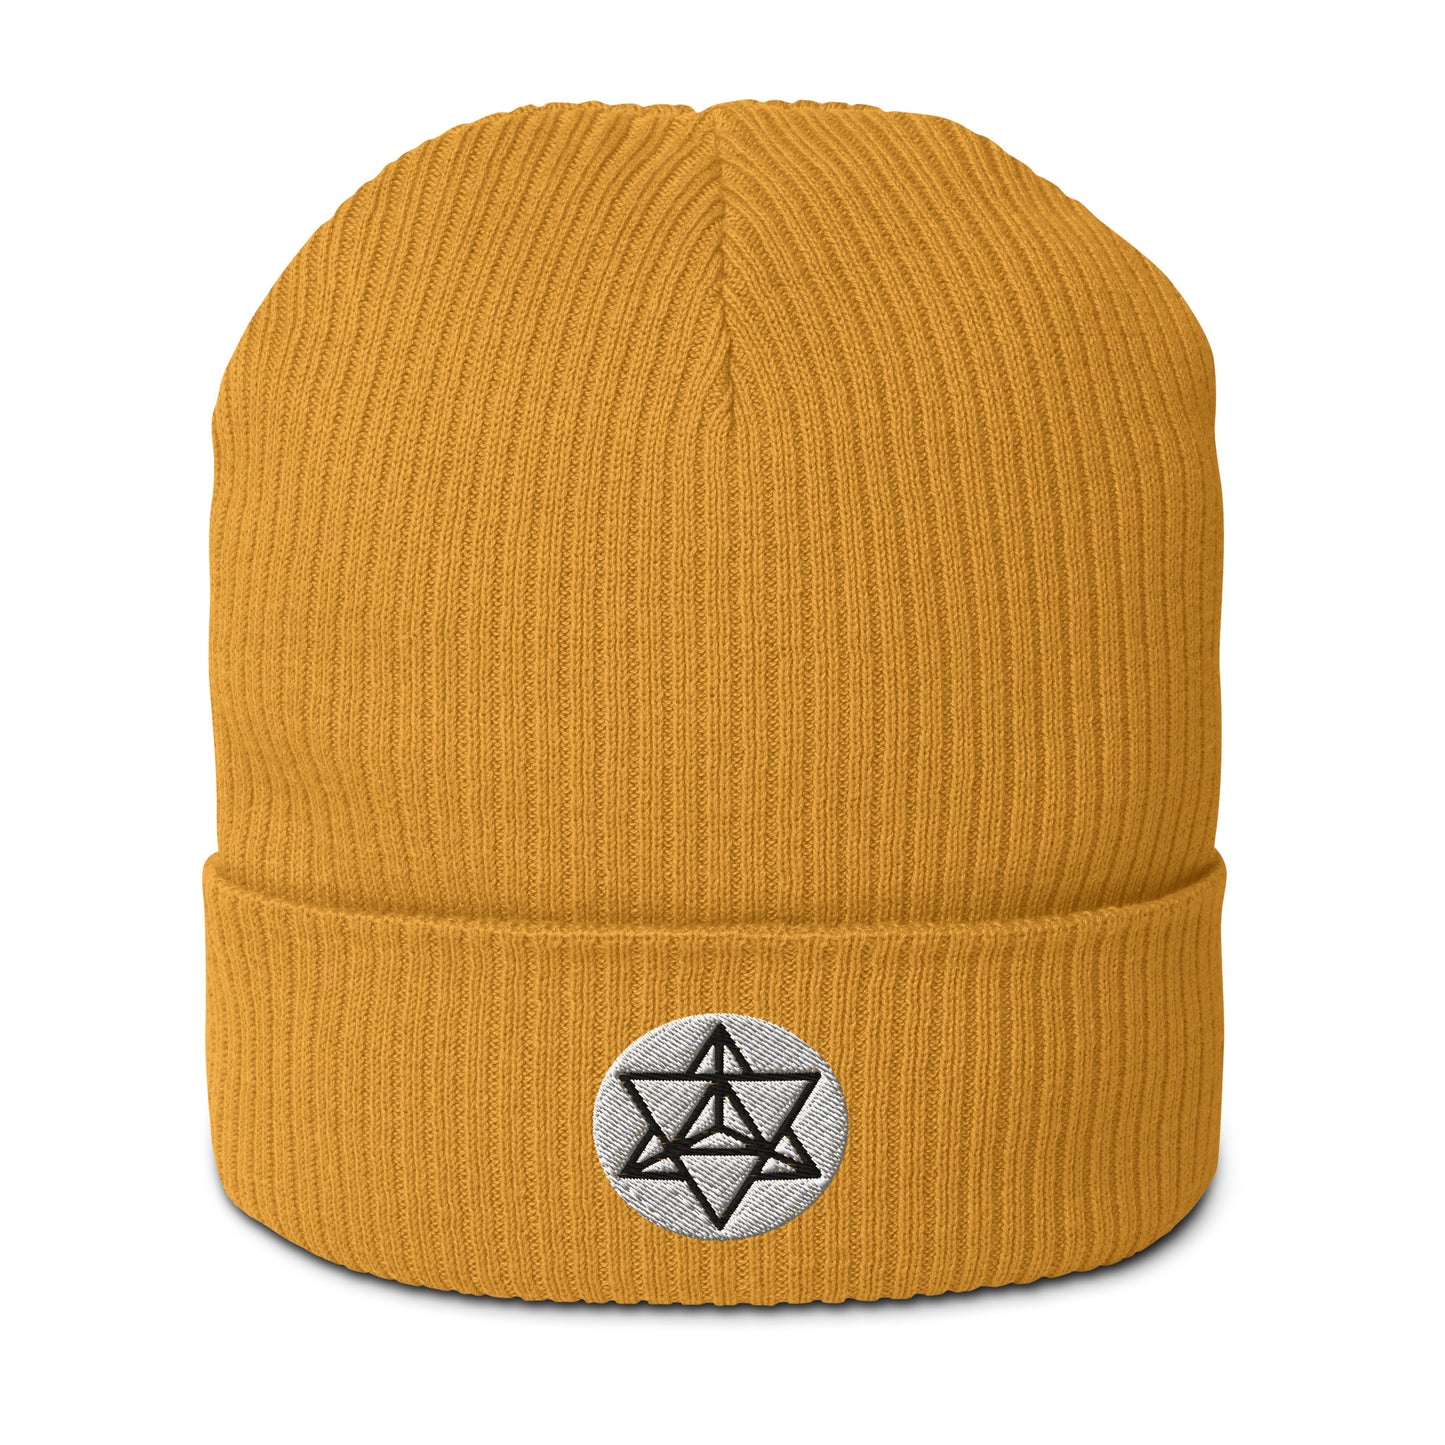 The Merkaba symbol beanie hat in Mustard Yellow, crafted from organic cotton and adorned with intricate embroidery. Symbolizing the journey of ascension and divine protection, the Merkaba represents profound spiritual transformation and unity of mind, body, and spirit. 